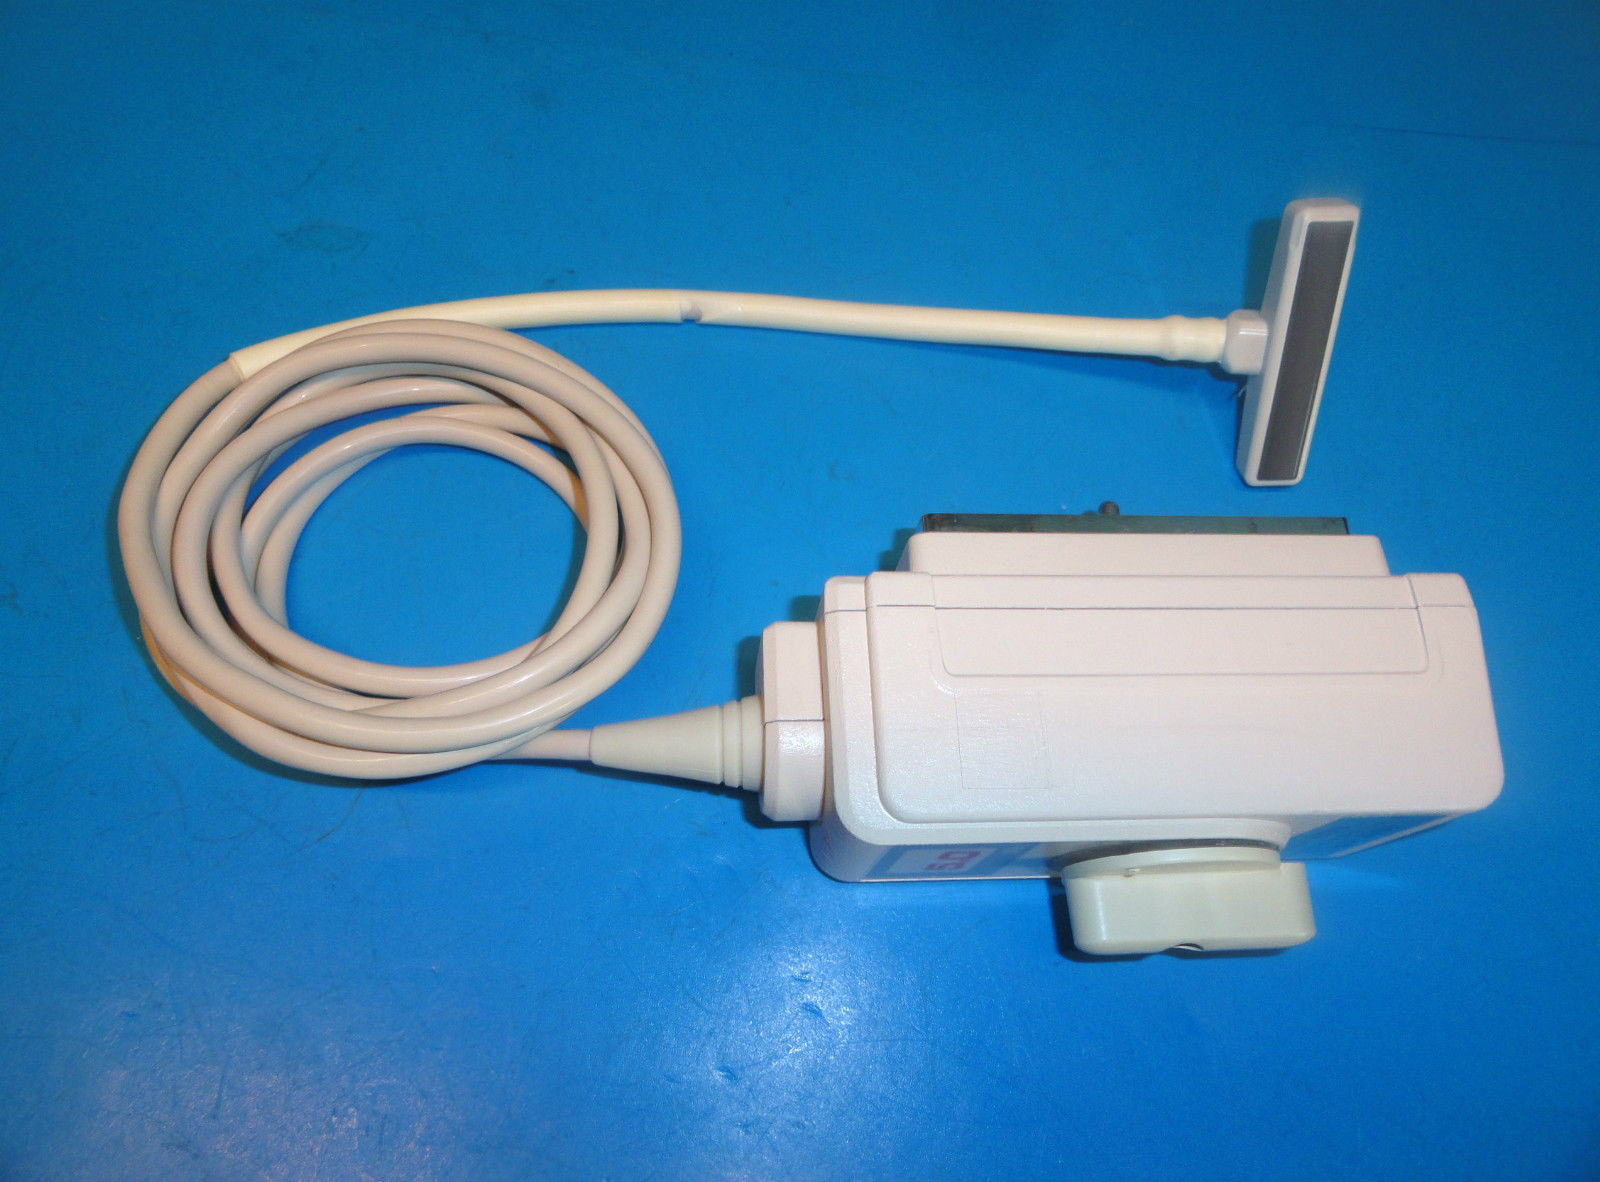 ALOKA UST-5819-T 5.0MHz Linear T Probe ForSSD -10001400/1700/2000/2200 (5265) DIAGNOSTIC ULTRASOUND MACHINES FOR SALE